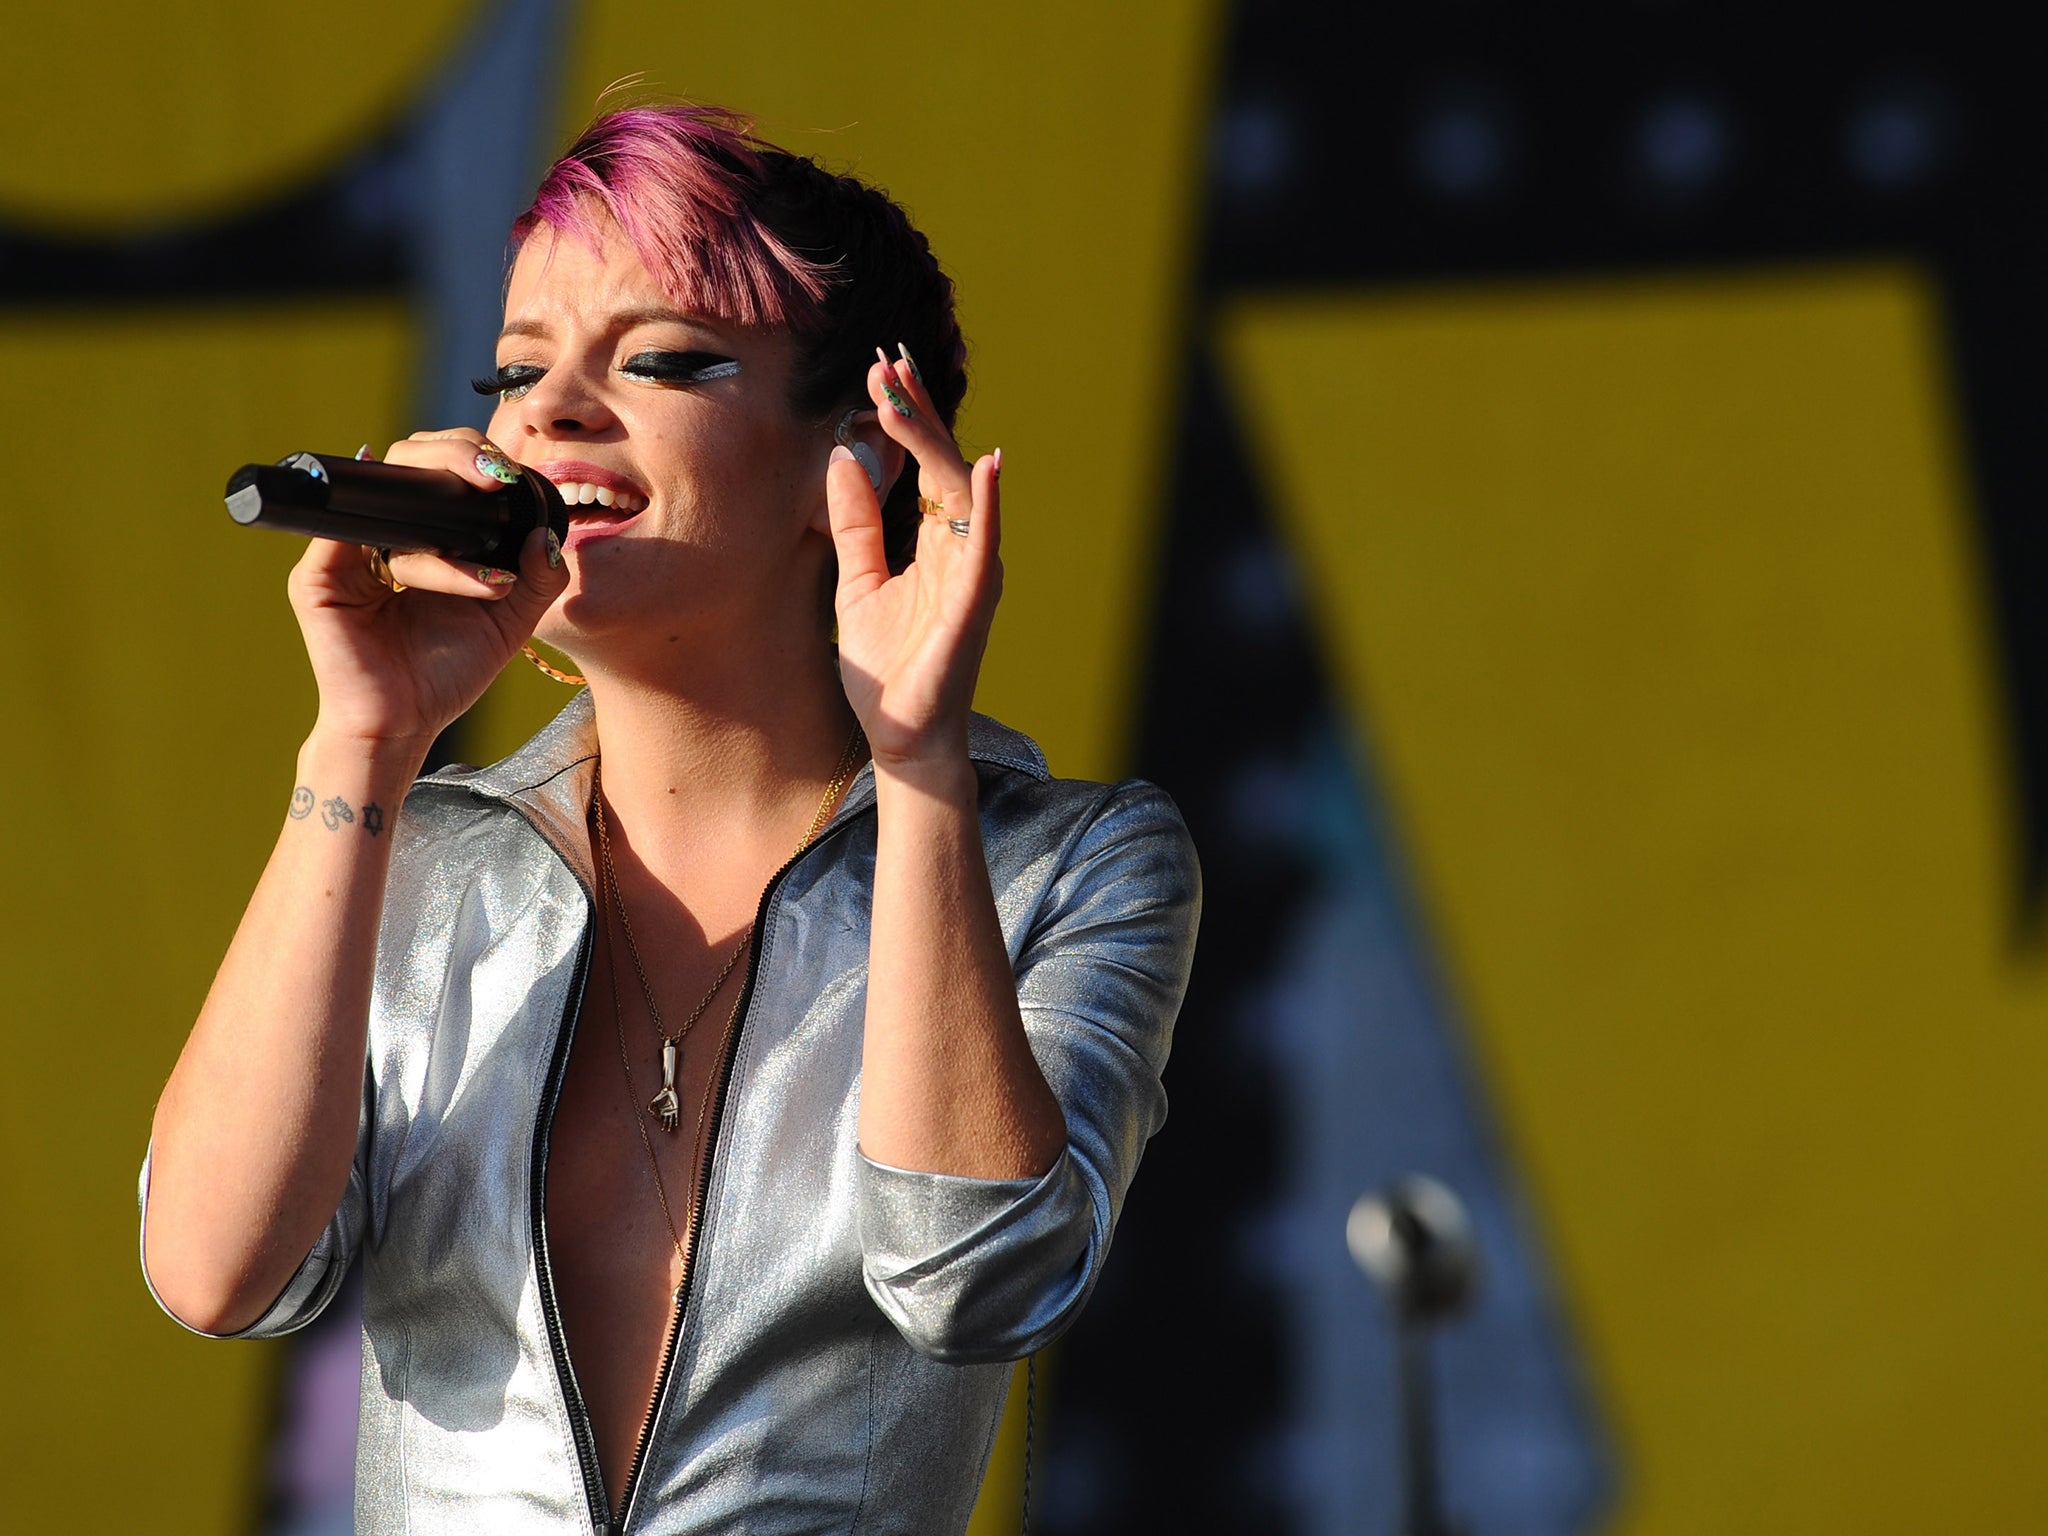 lily allen full discography torrent